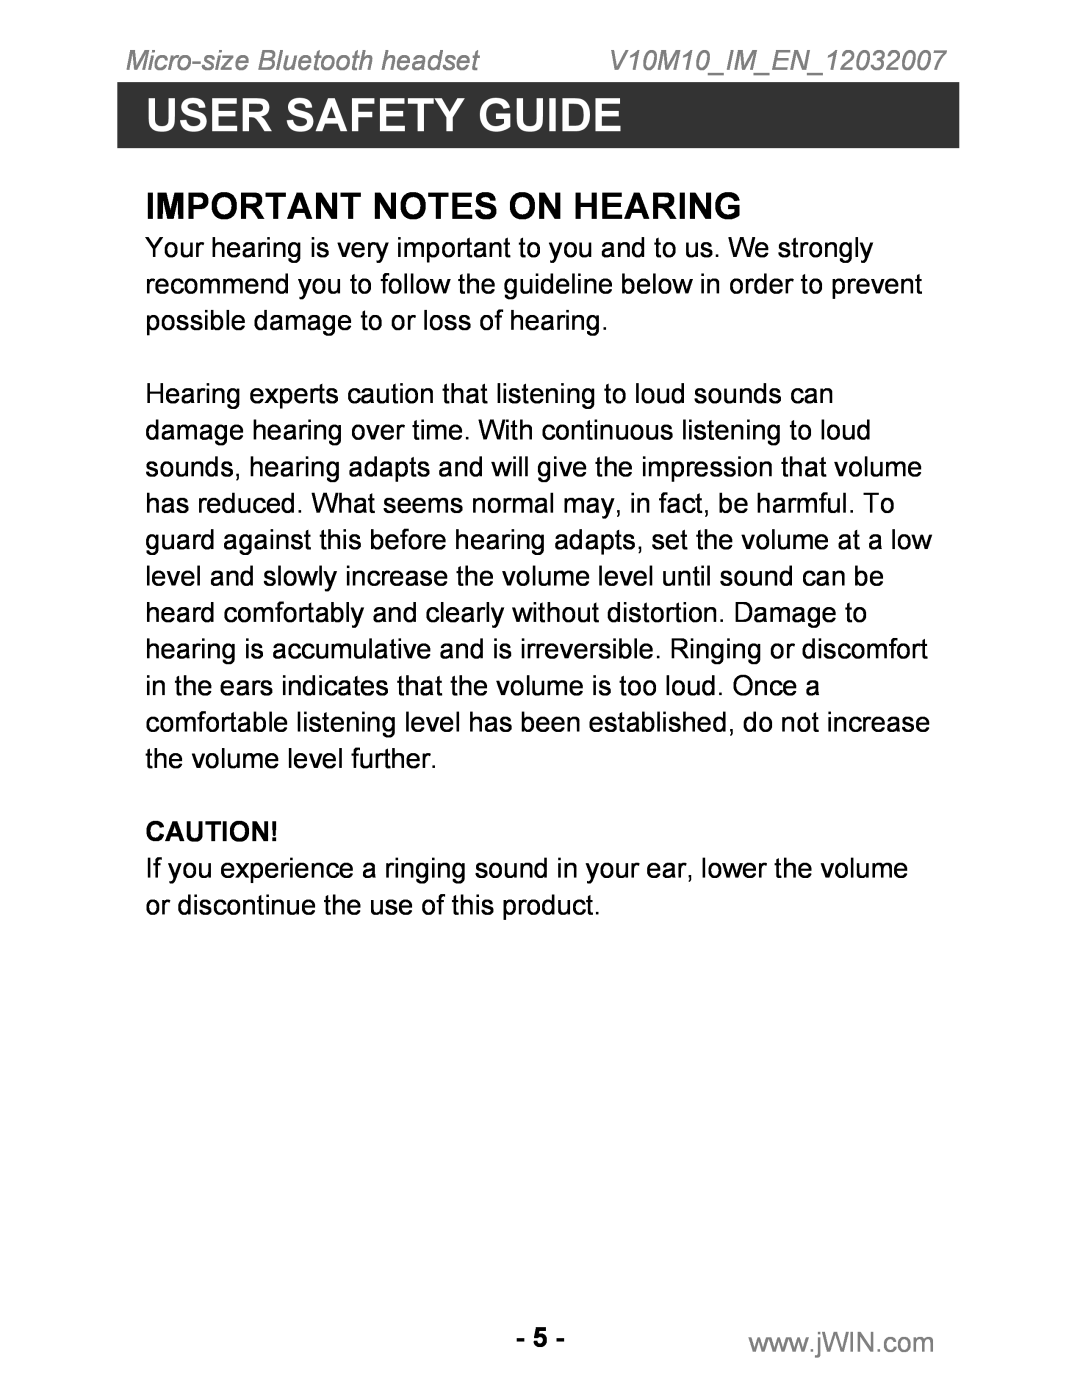 Jwin JB-TH210 instruction manual Important Notes On Hearing, User Safety Guide, Micro-sizeBluetooth headset 